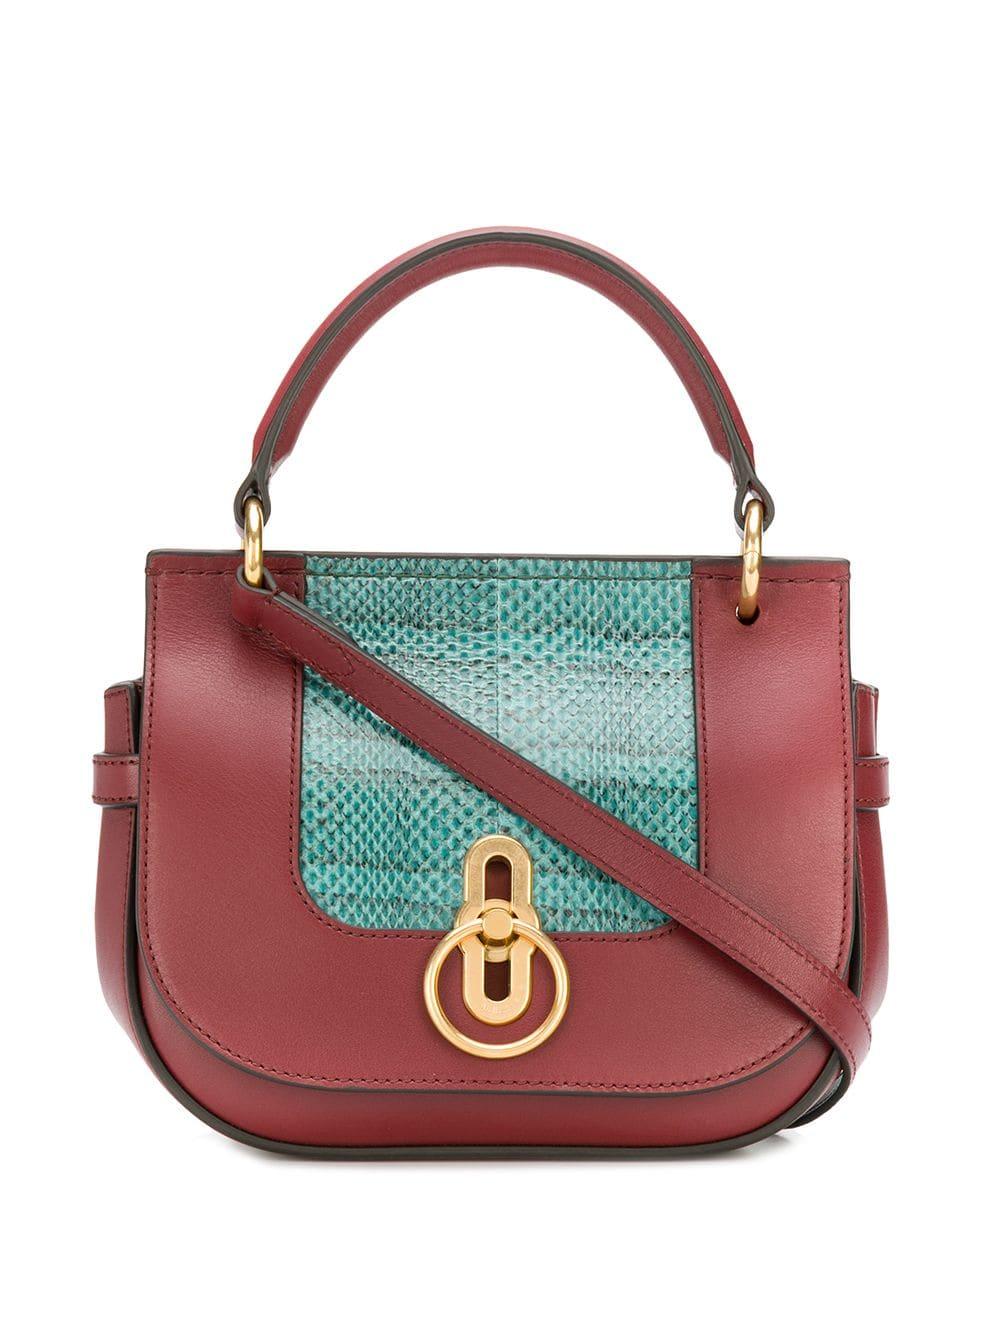 Mulberry Small Amberley Satchel in Red - Lyst